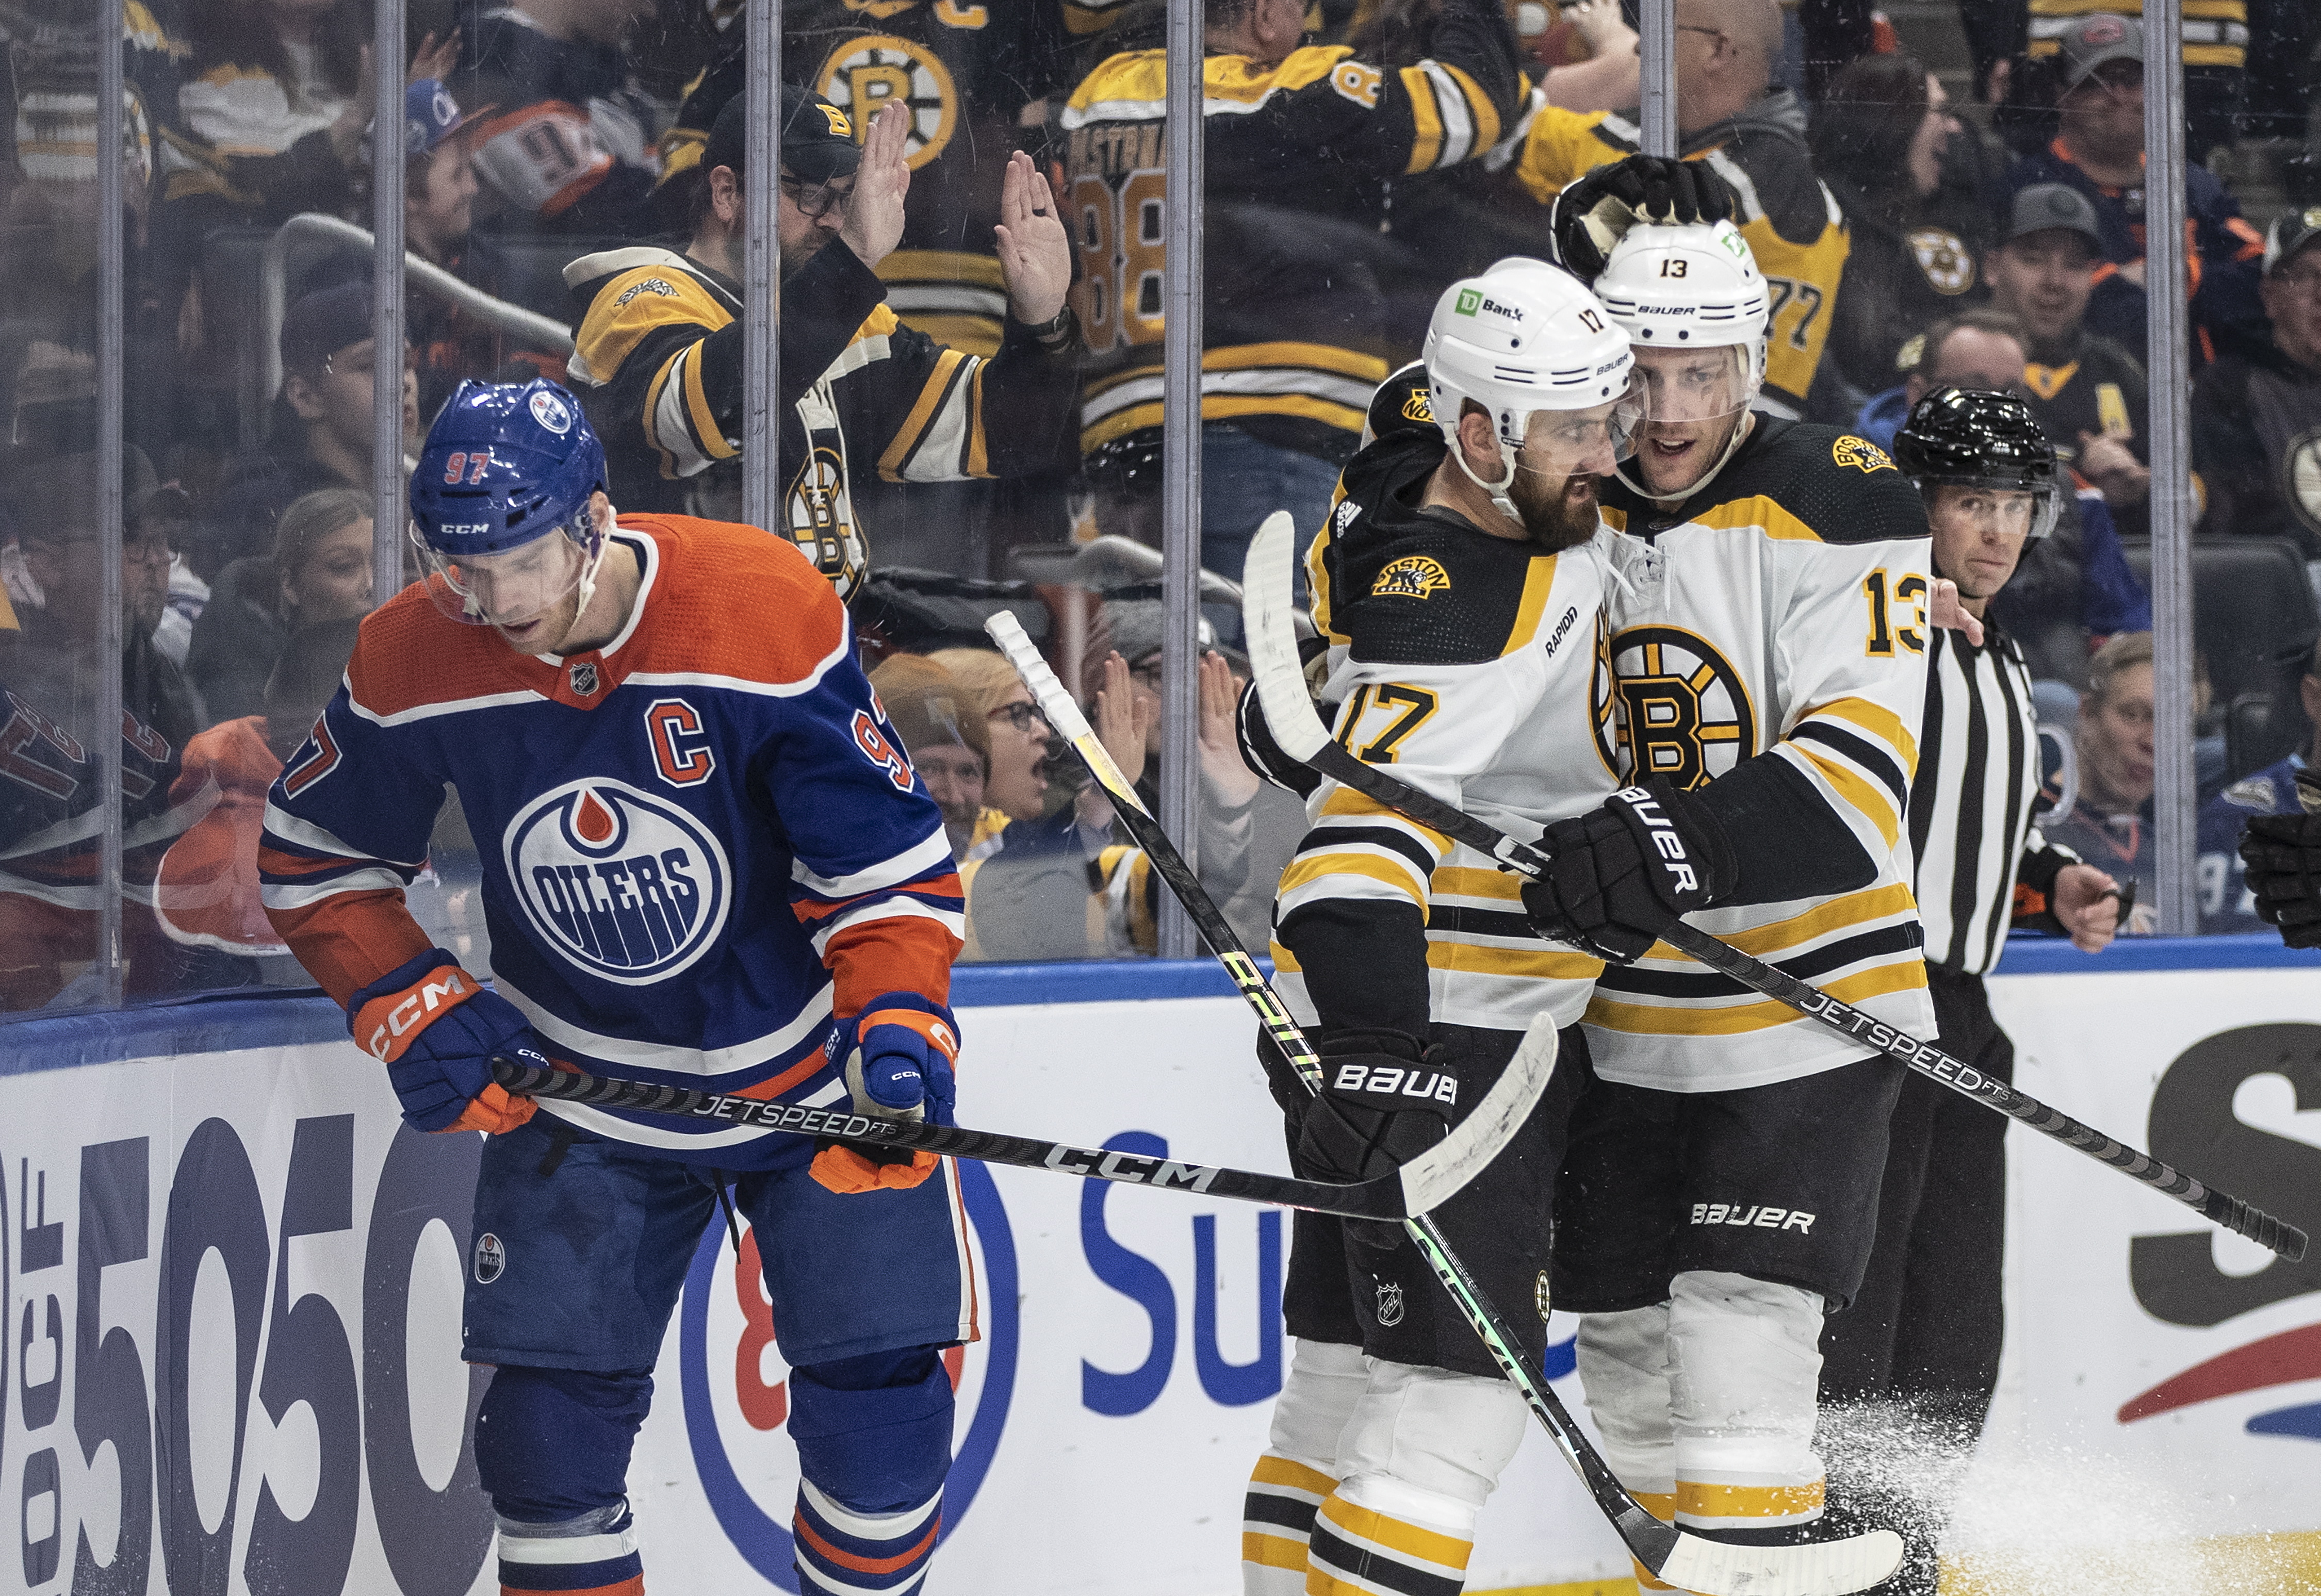 How to watch Bruins-Oilers tonight